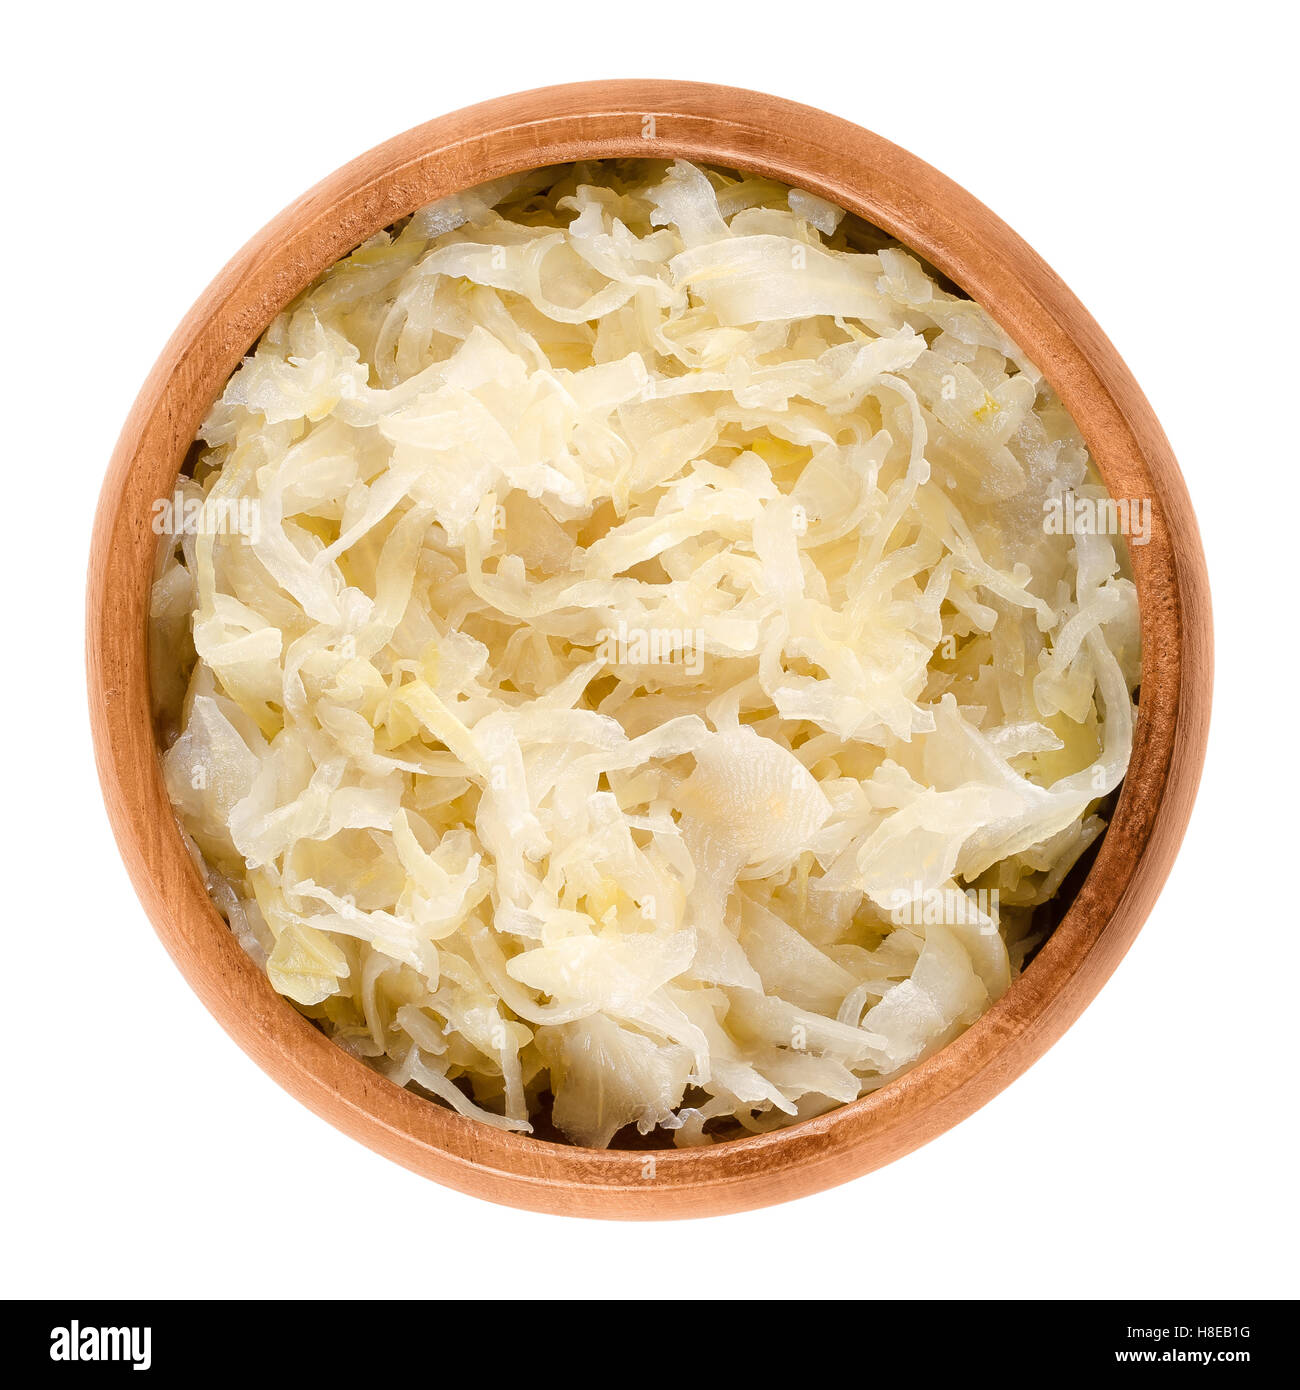 German sauerkraut in wooden bowl over white. Finely cut cabbage, fermented by lactic acid bacteria with long shelf life. Stock Photo